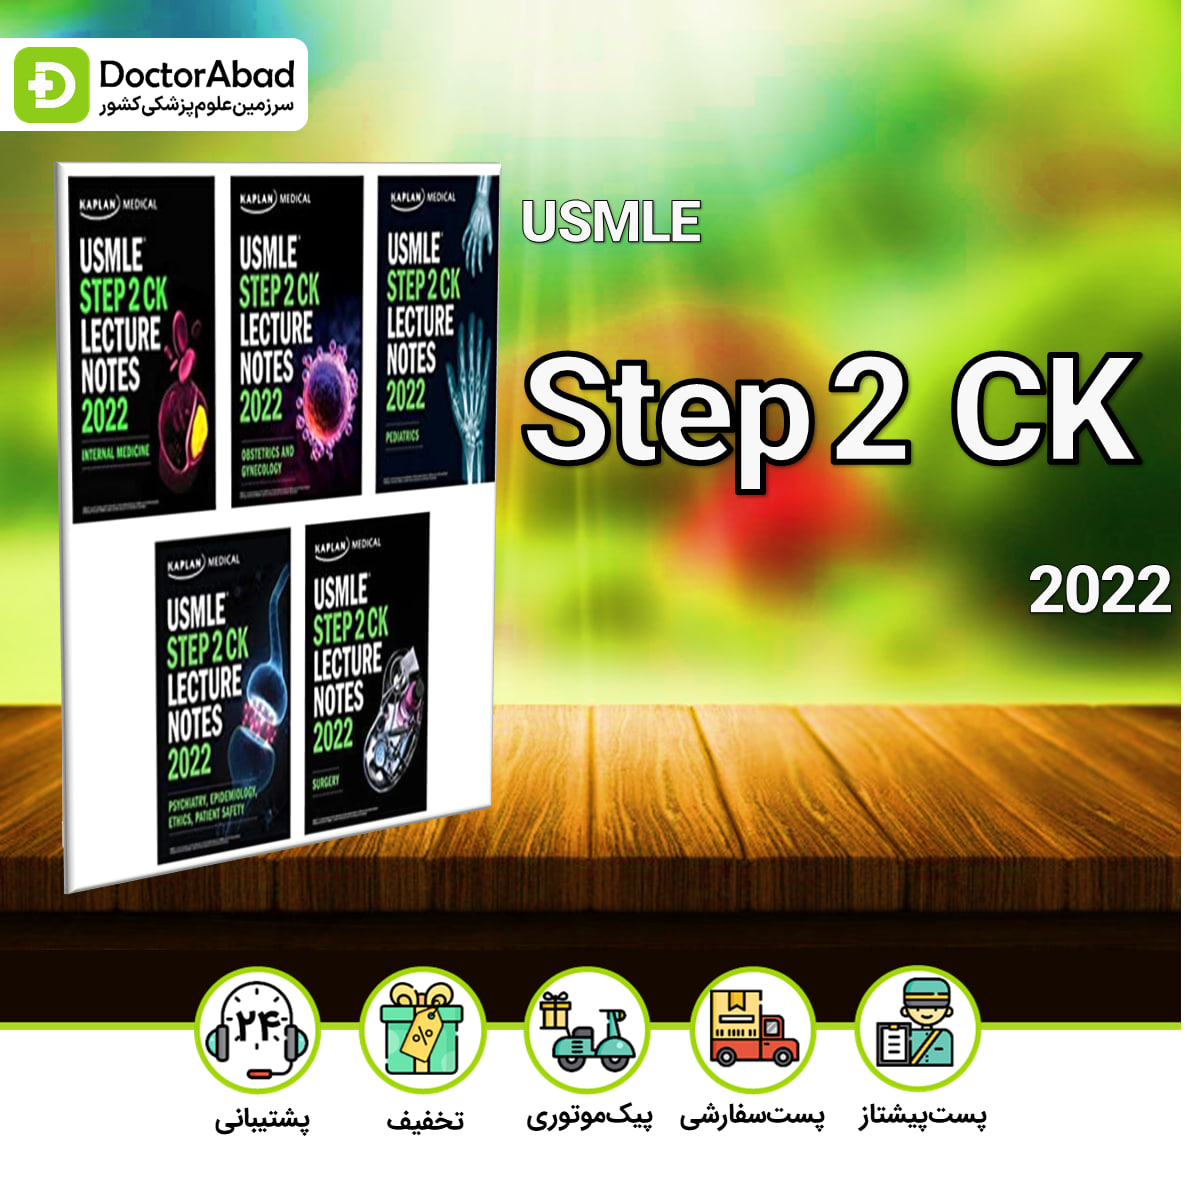 USMLE Step 2 CK Lecture Notes 2022 5-book